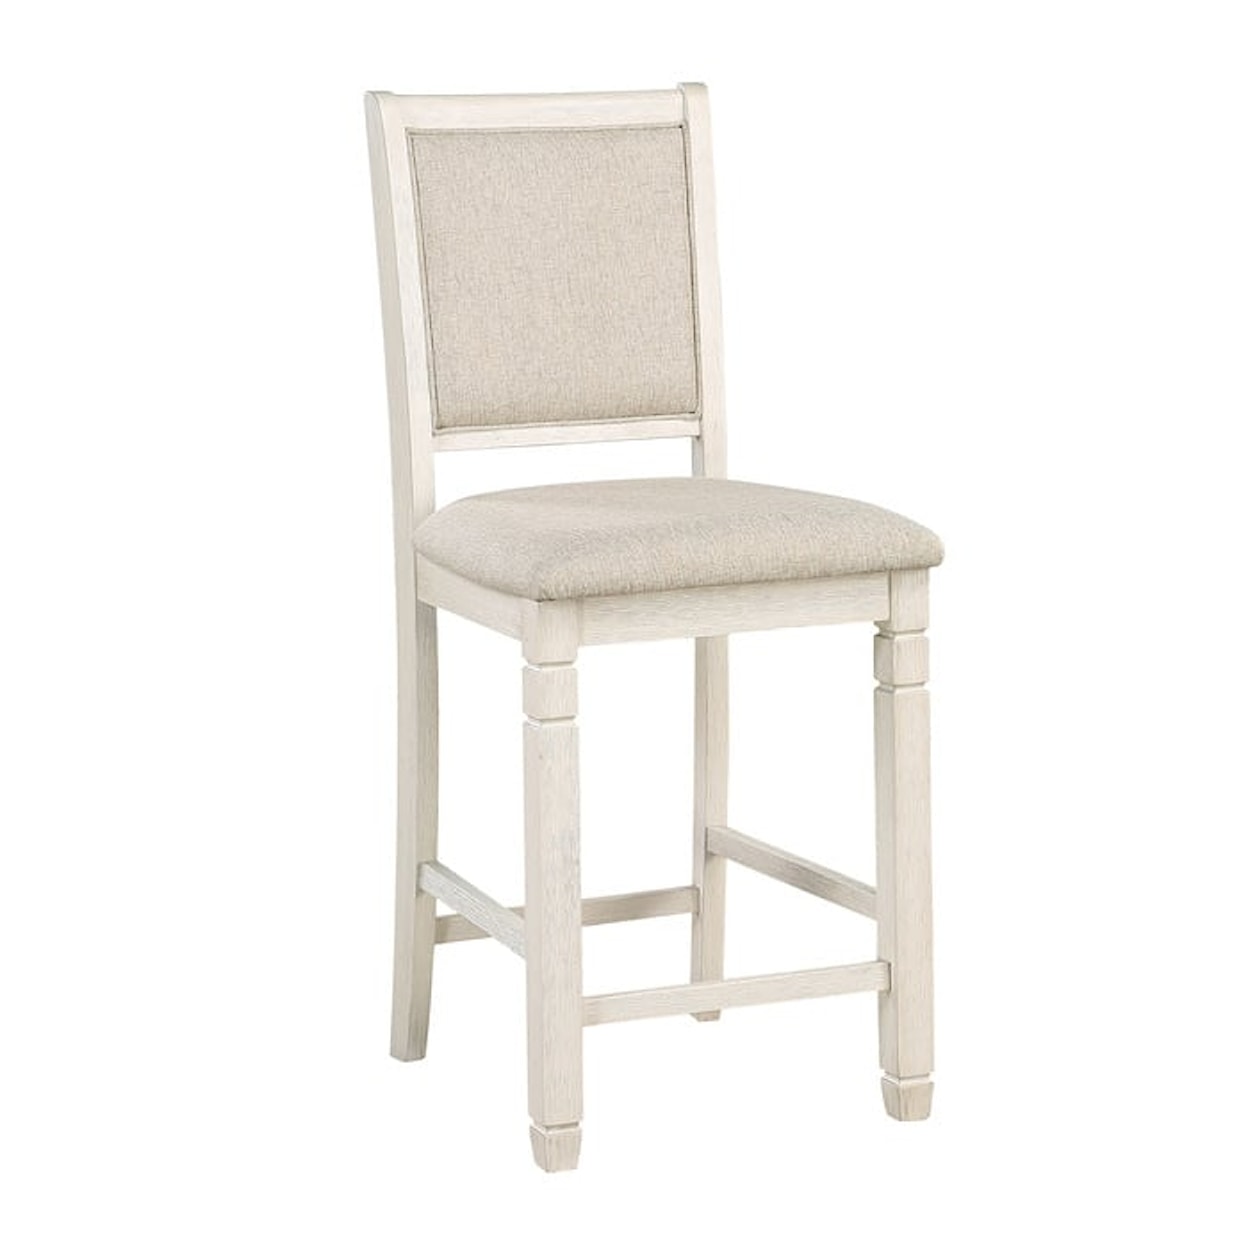 Homelegance Asher Counter Height Chair